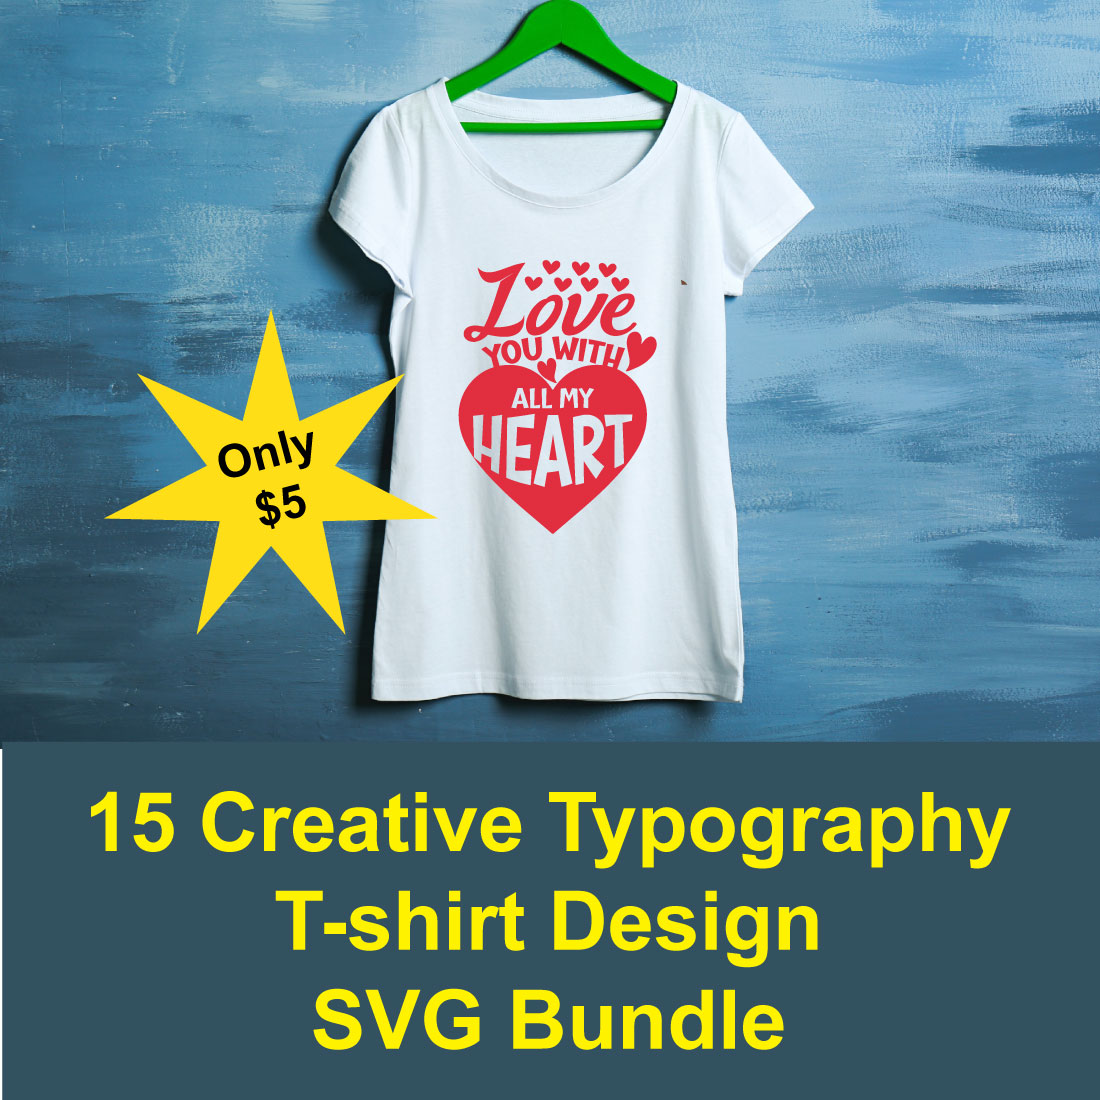 15 Creative Typography T-shirt Designs image preview.